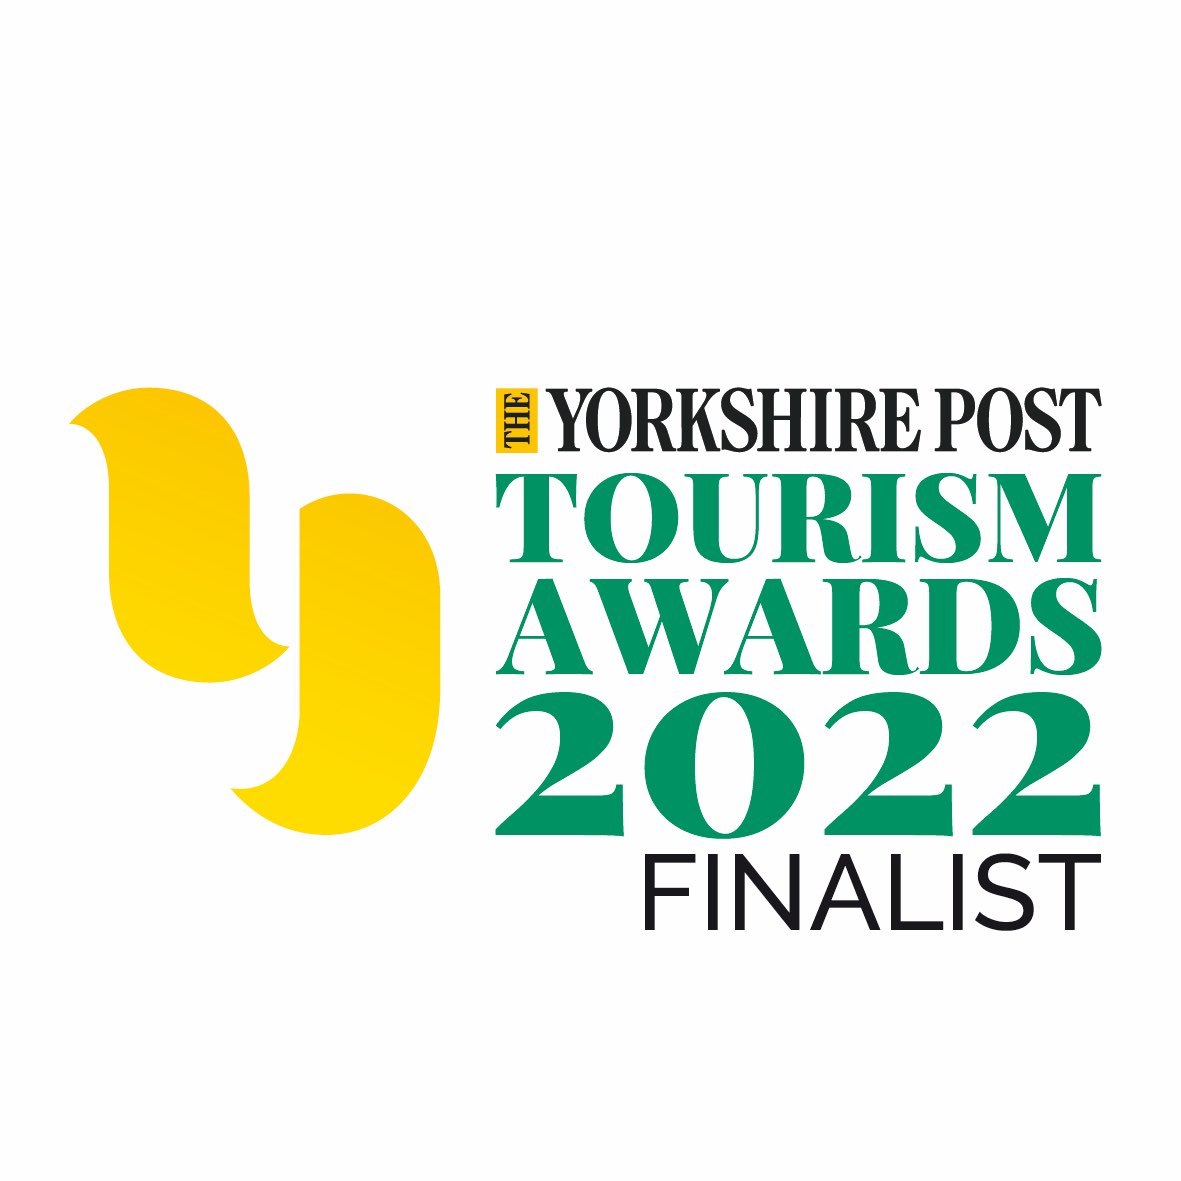 Yorkshire Tourism Awards 2022 FINALIST Harrogate Lifestyle Apartments have been shortlisted for the category of Outstanding Customer Service Award in this year’s Yorkshire Tourism Awards 2022.